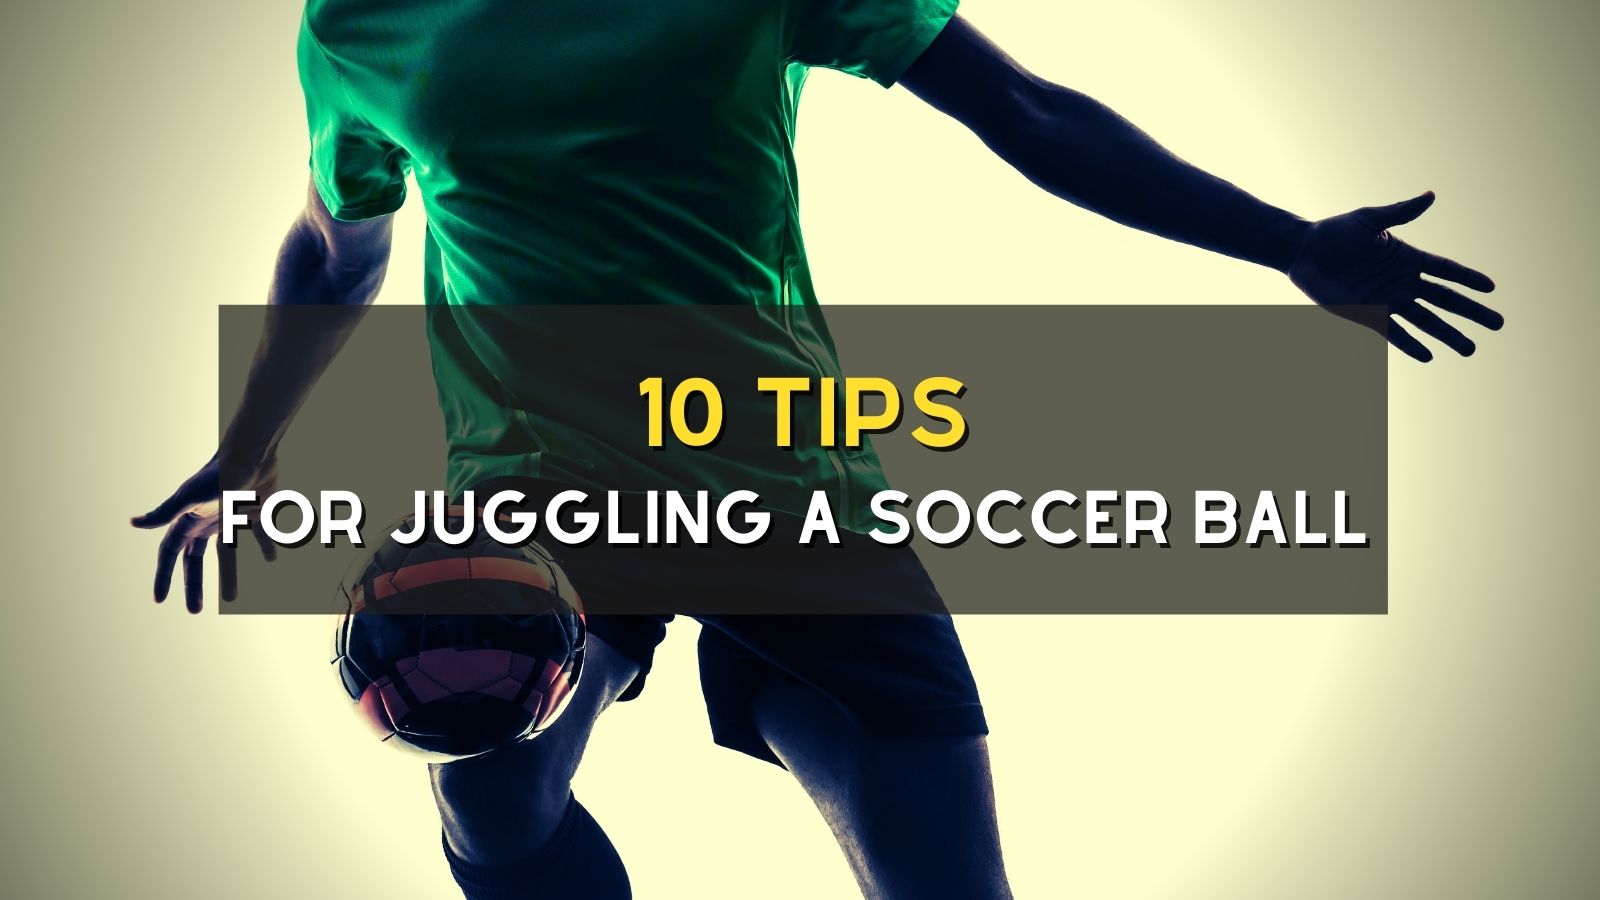 On How To Juggle A Soccer Ball Better